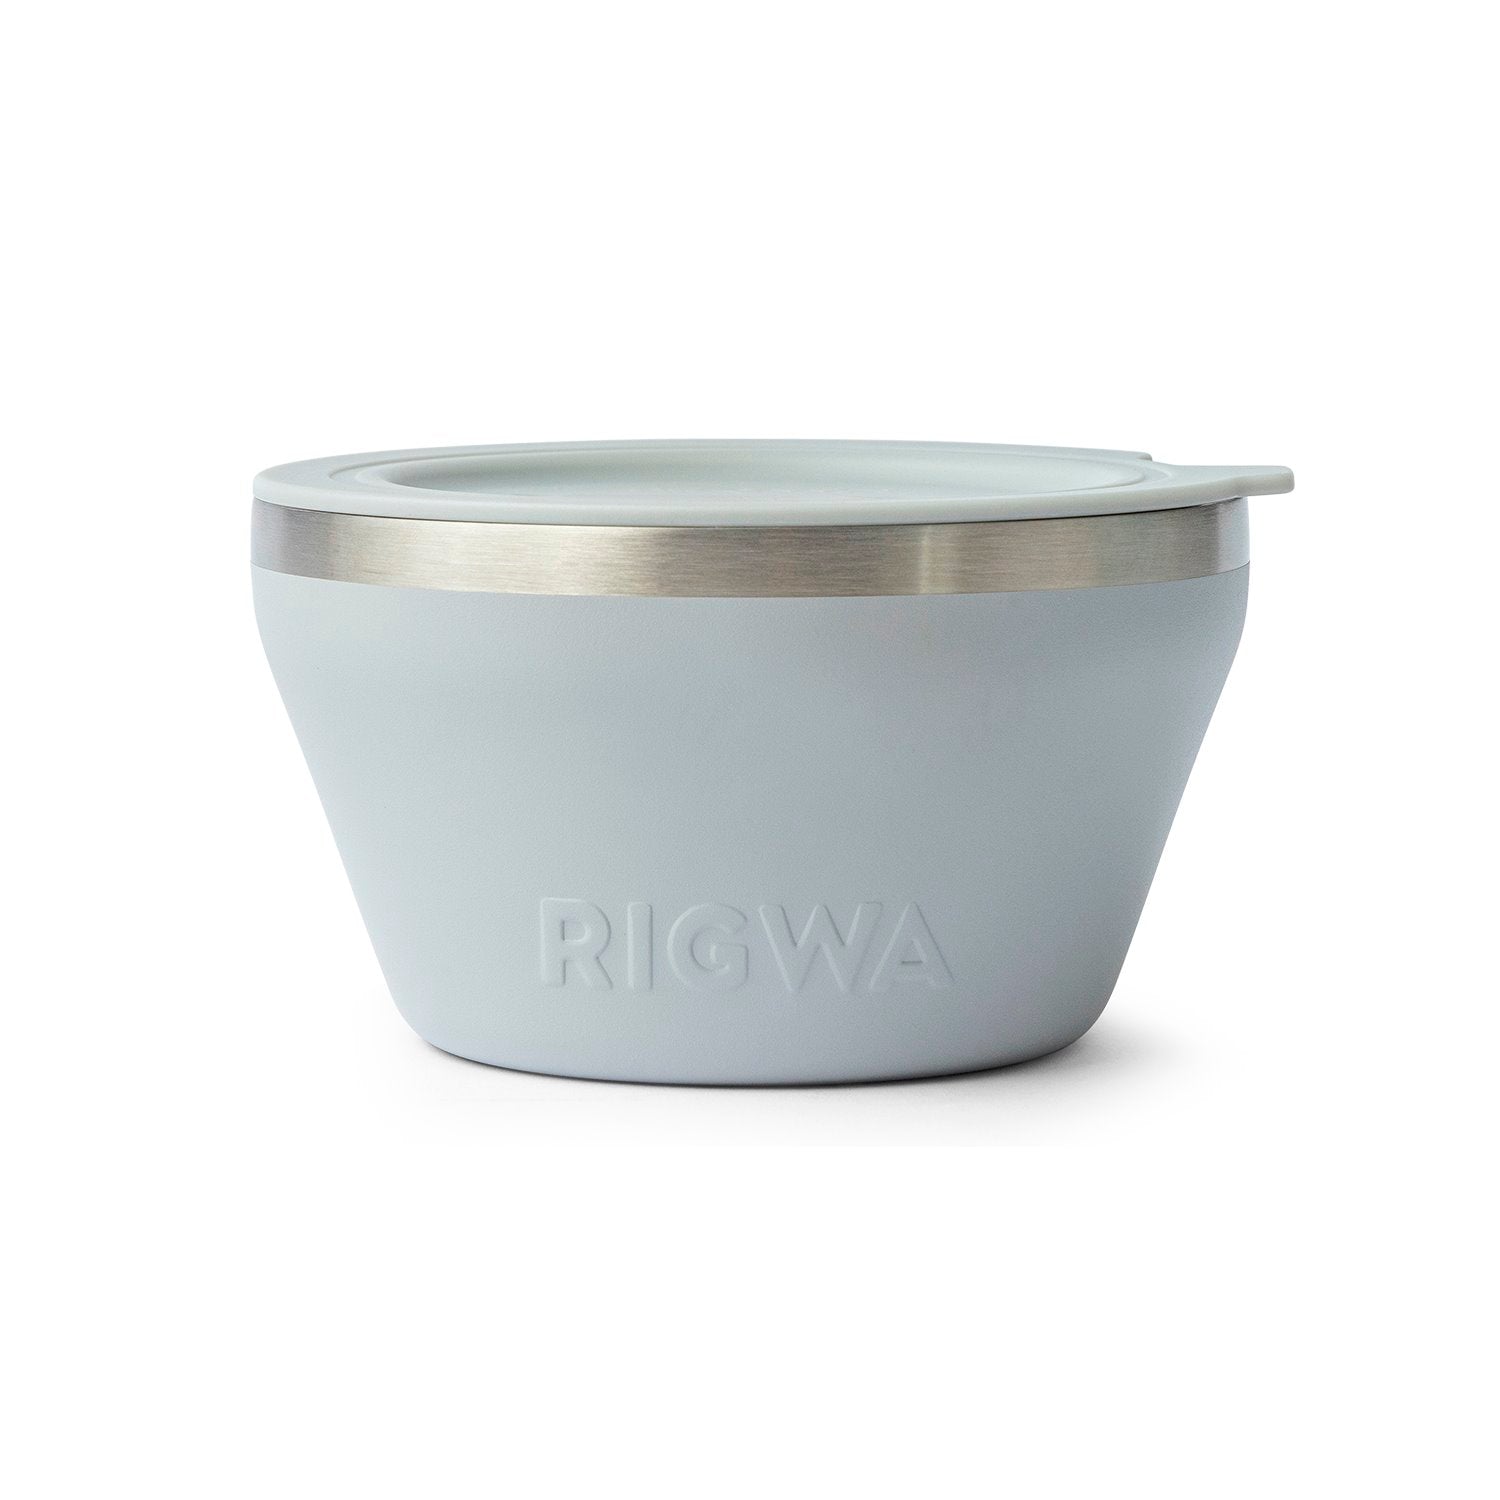 Rigwa 1.5 (Blue Dusk) Stainless Steel Insulated Bowl, 48 oz